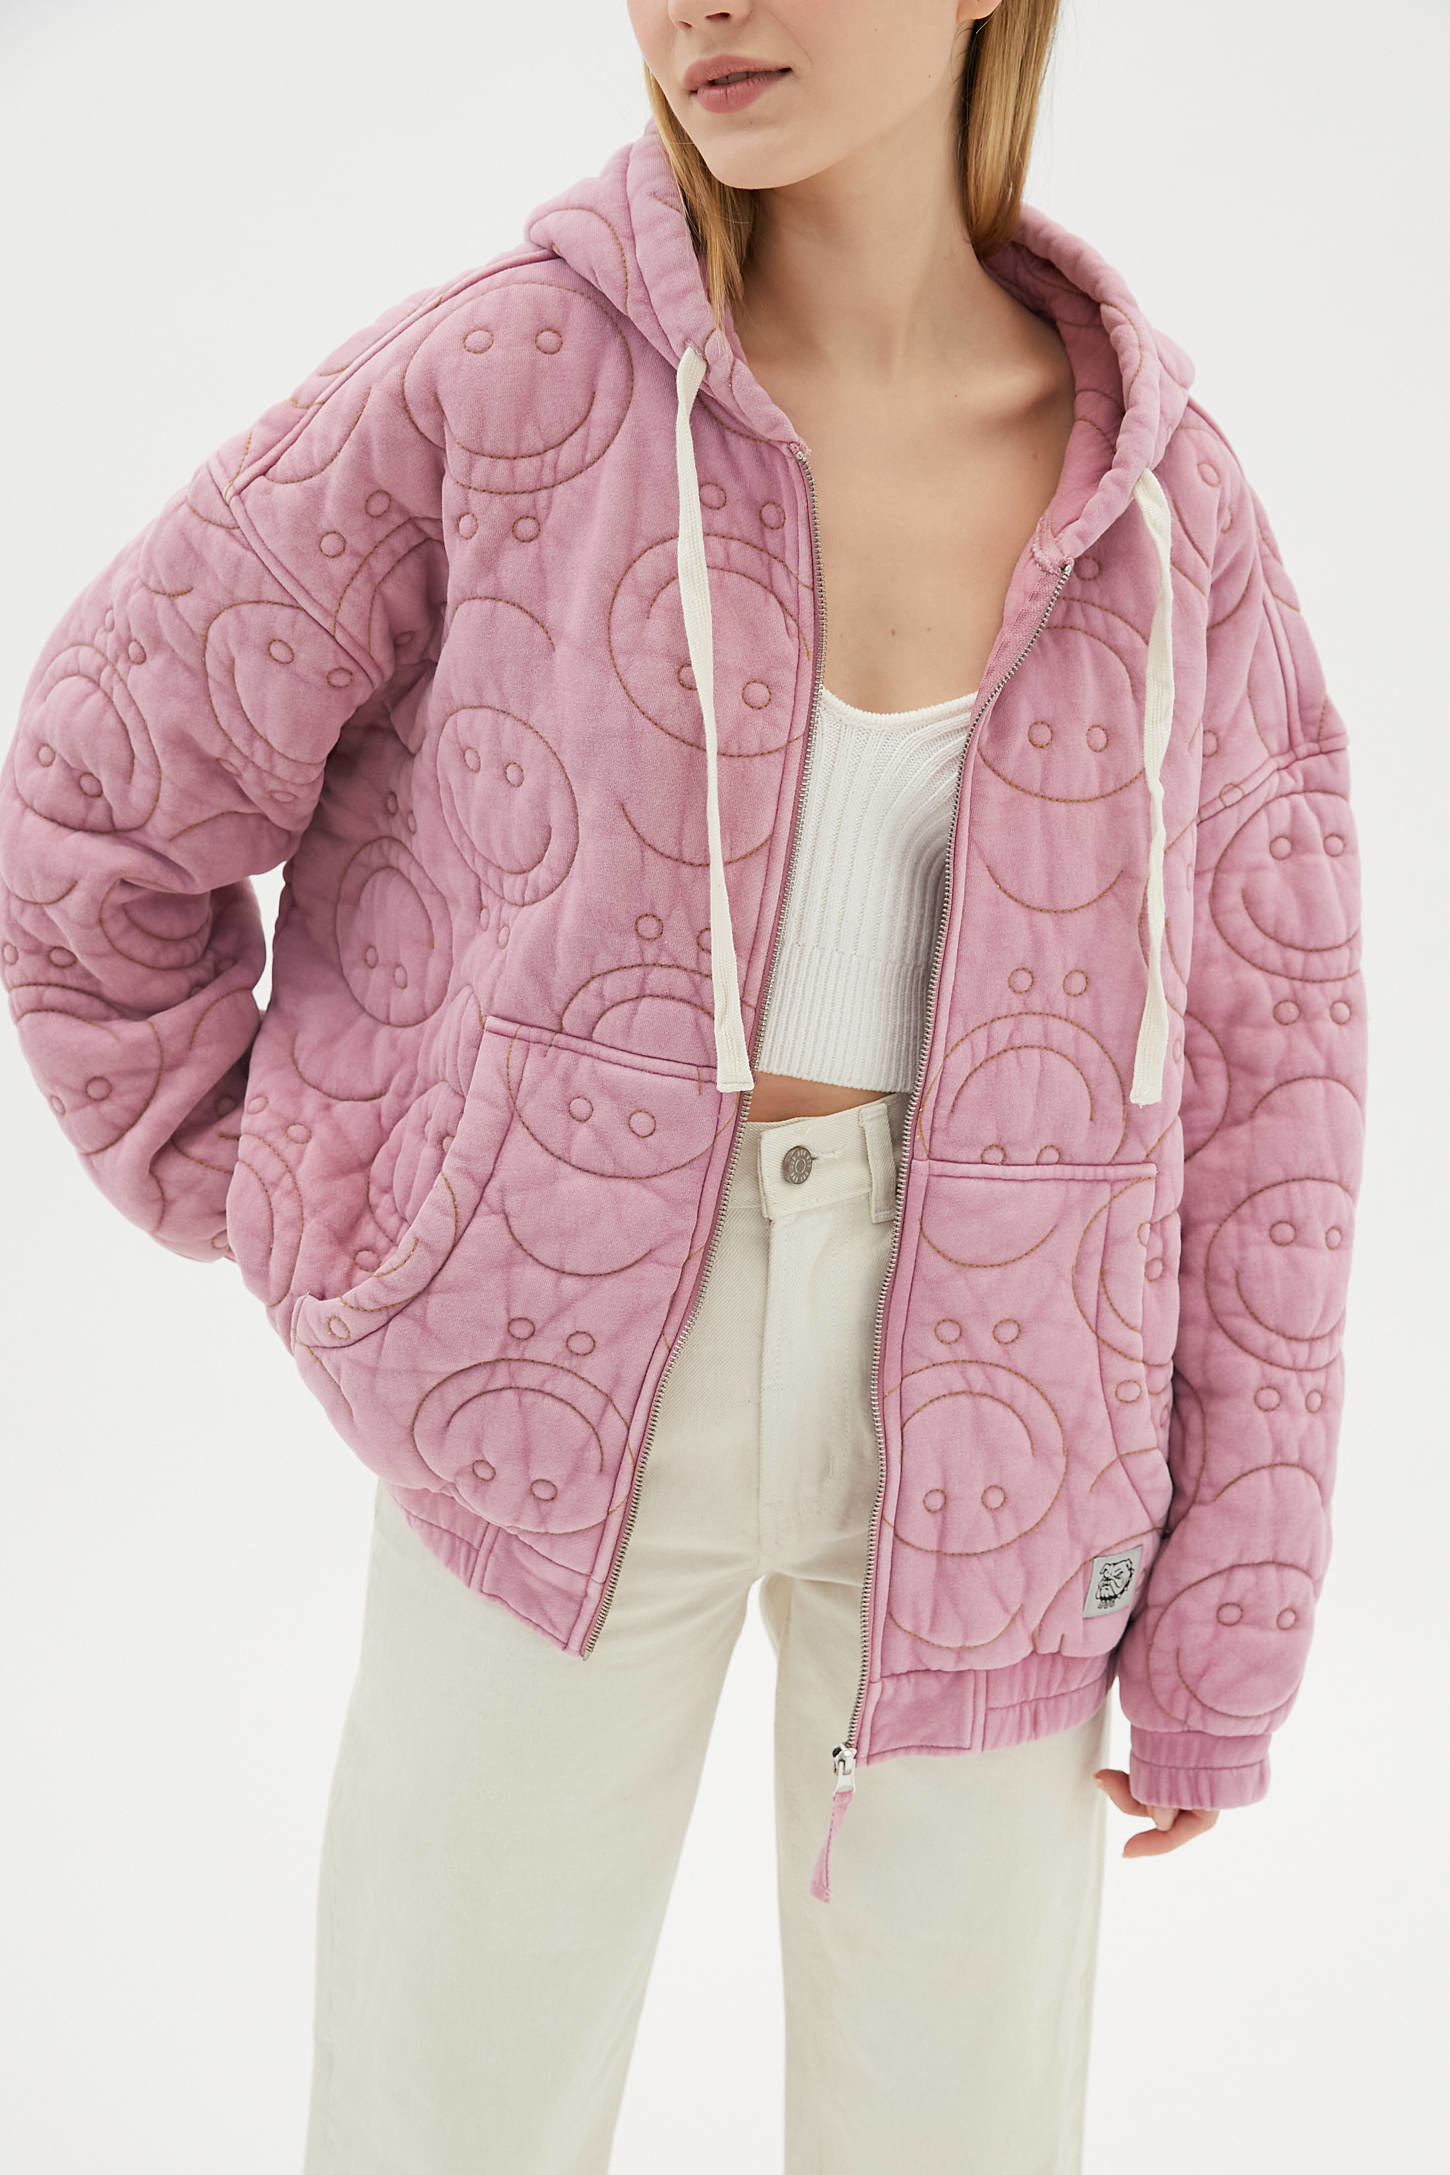 A model wearing the jacket in pink with quilted smiley faces